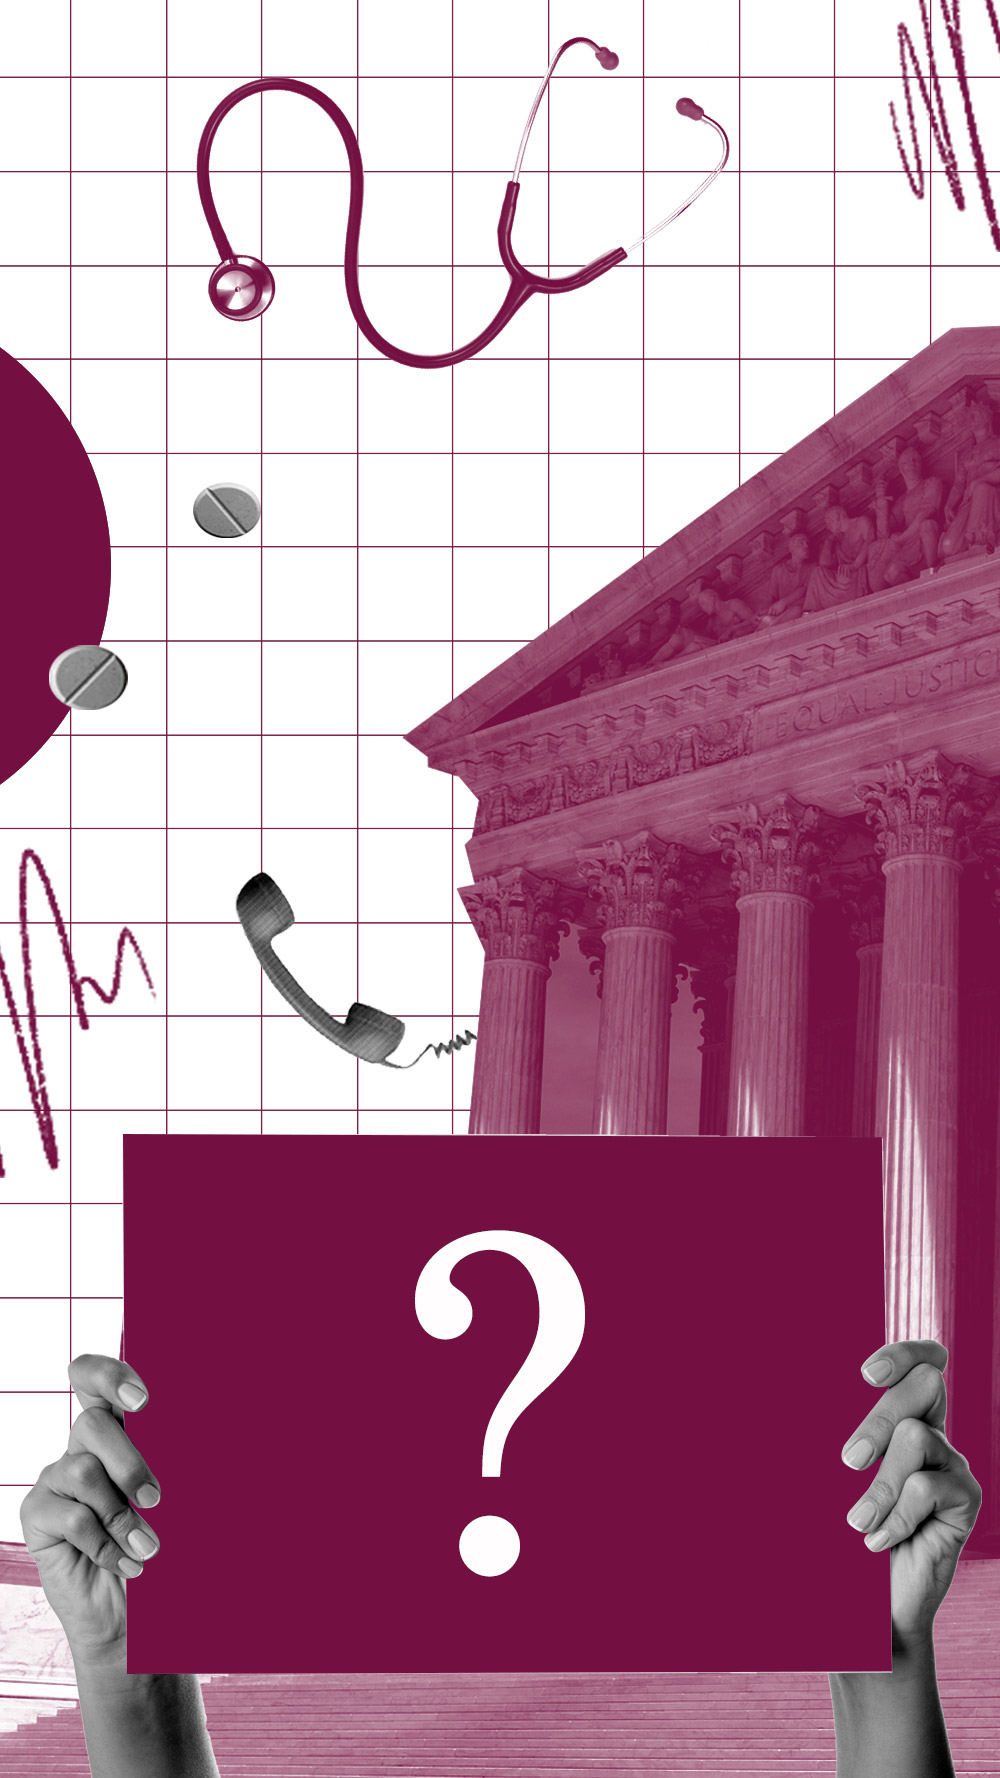 A purple collage of images, including the Supreme Court, a stethoscope, and two hands holding a sign with a question mark.